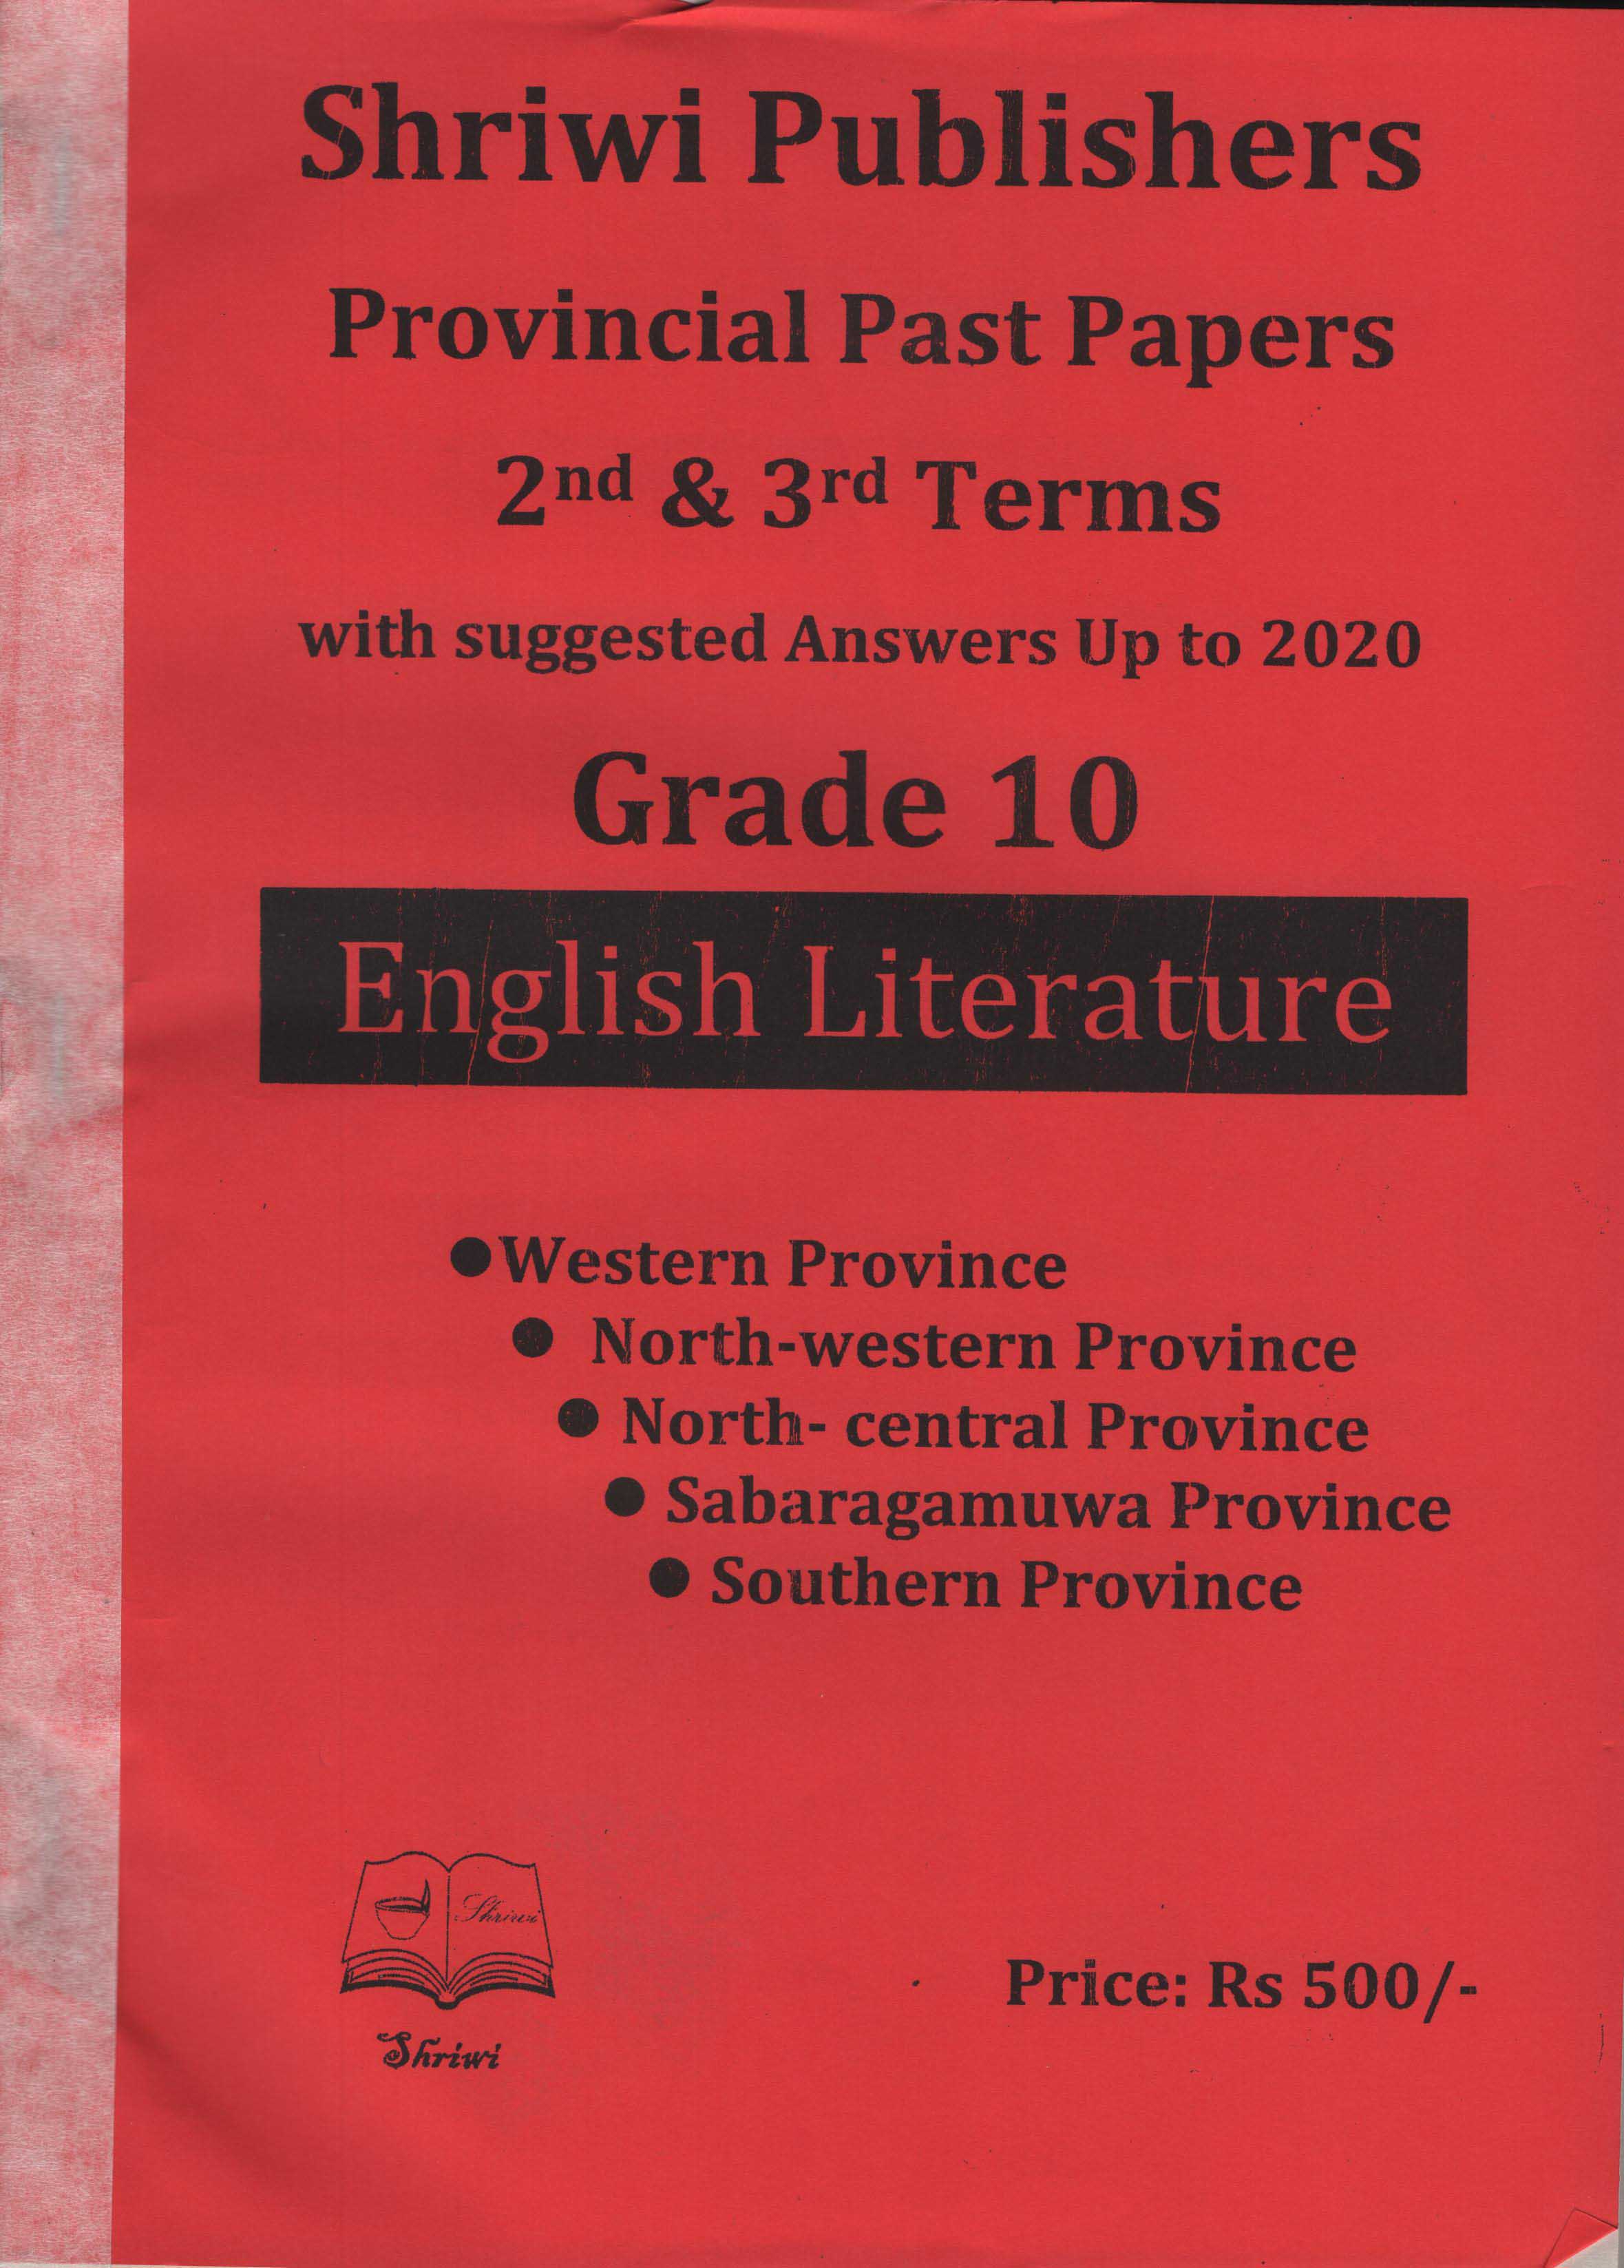 Shriwi Grade 10 English Literature Provincial Past Papers 1st, 2nd & 3rd Terms  with Suggested Answers Up to 2021 